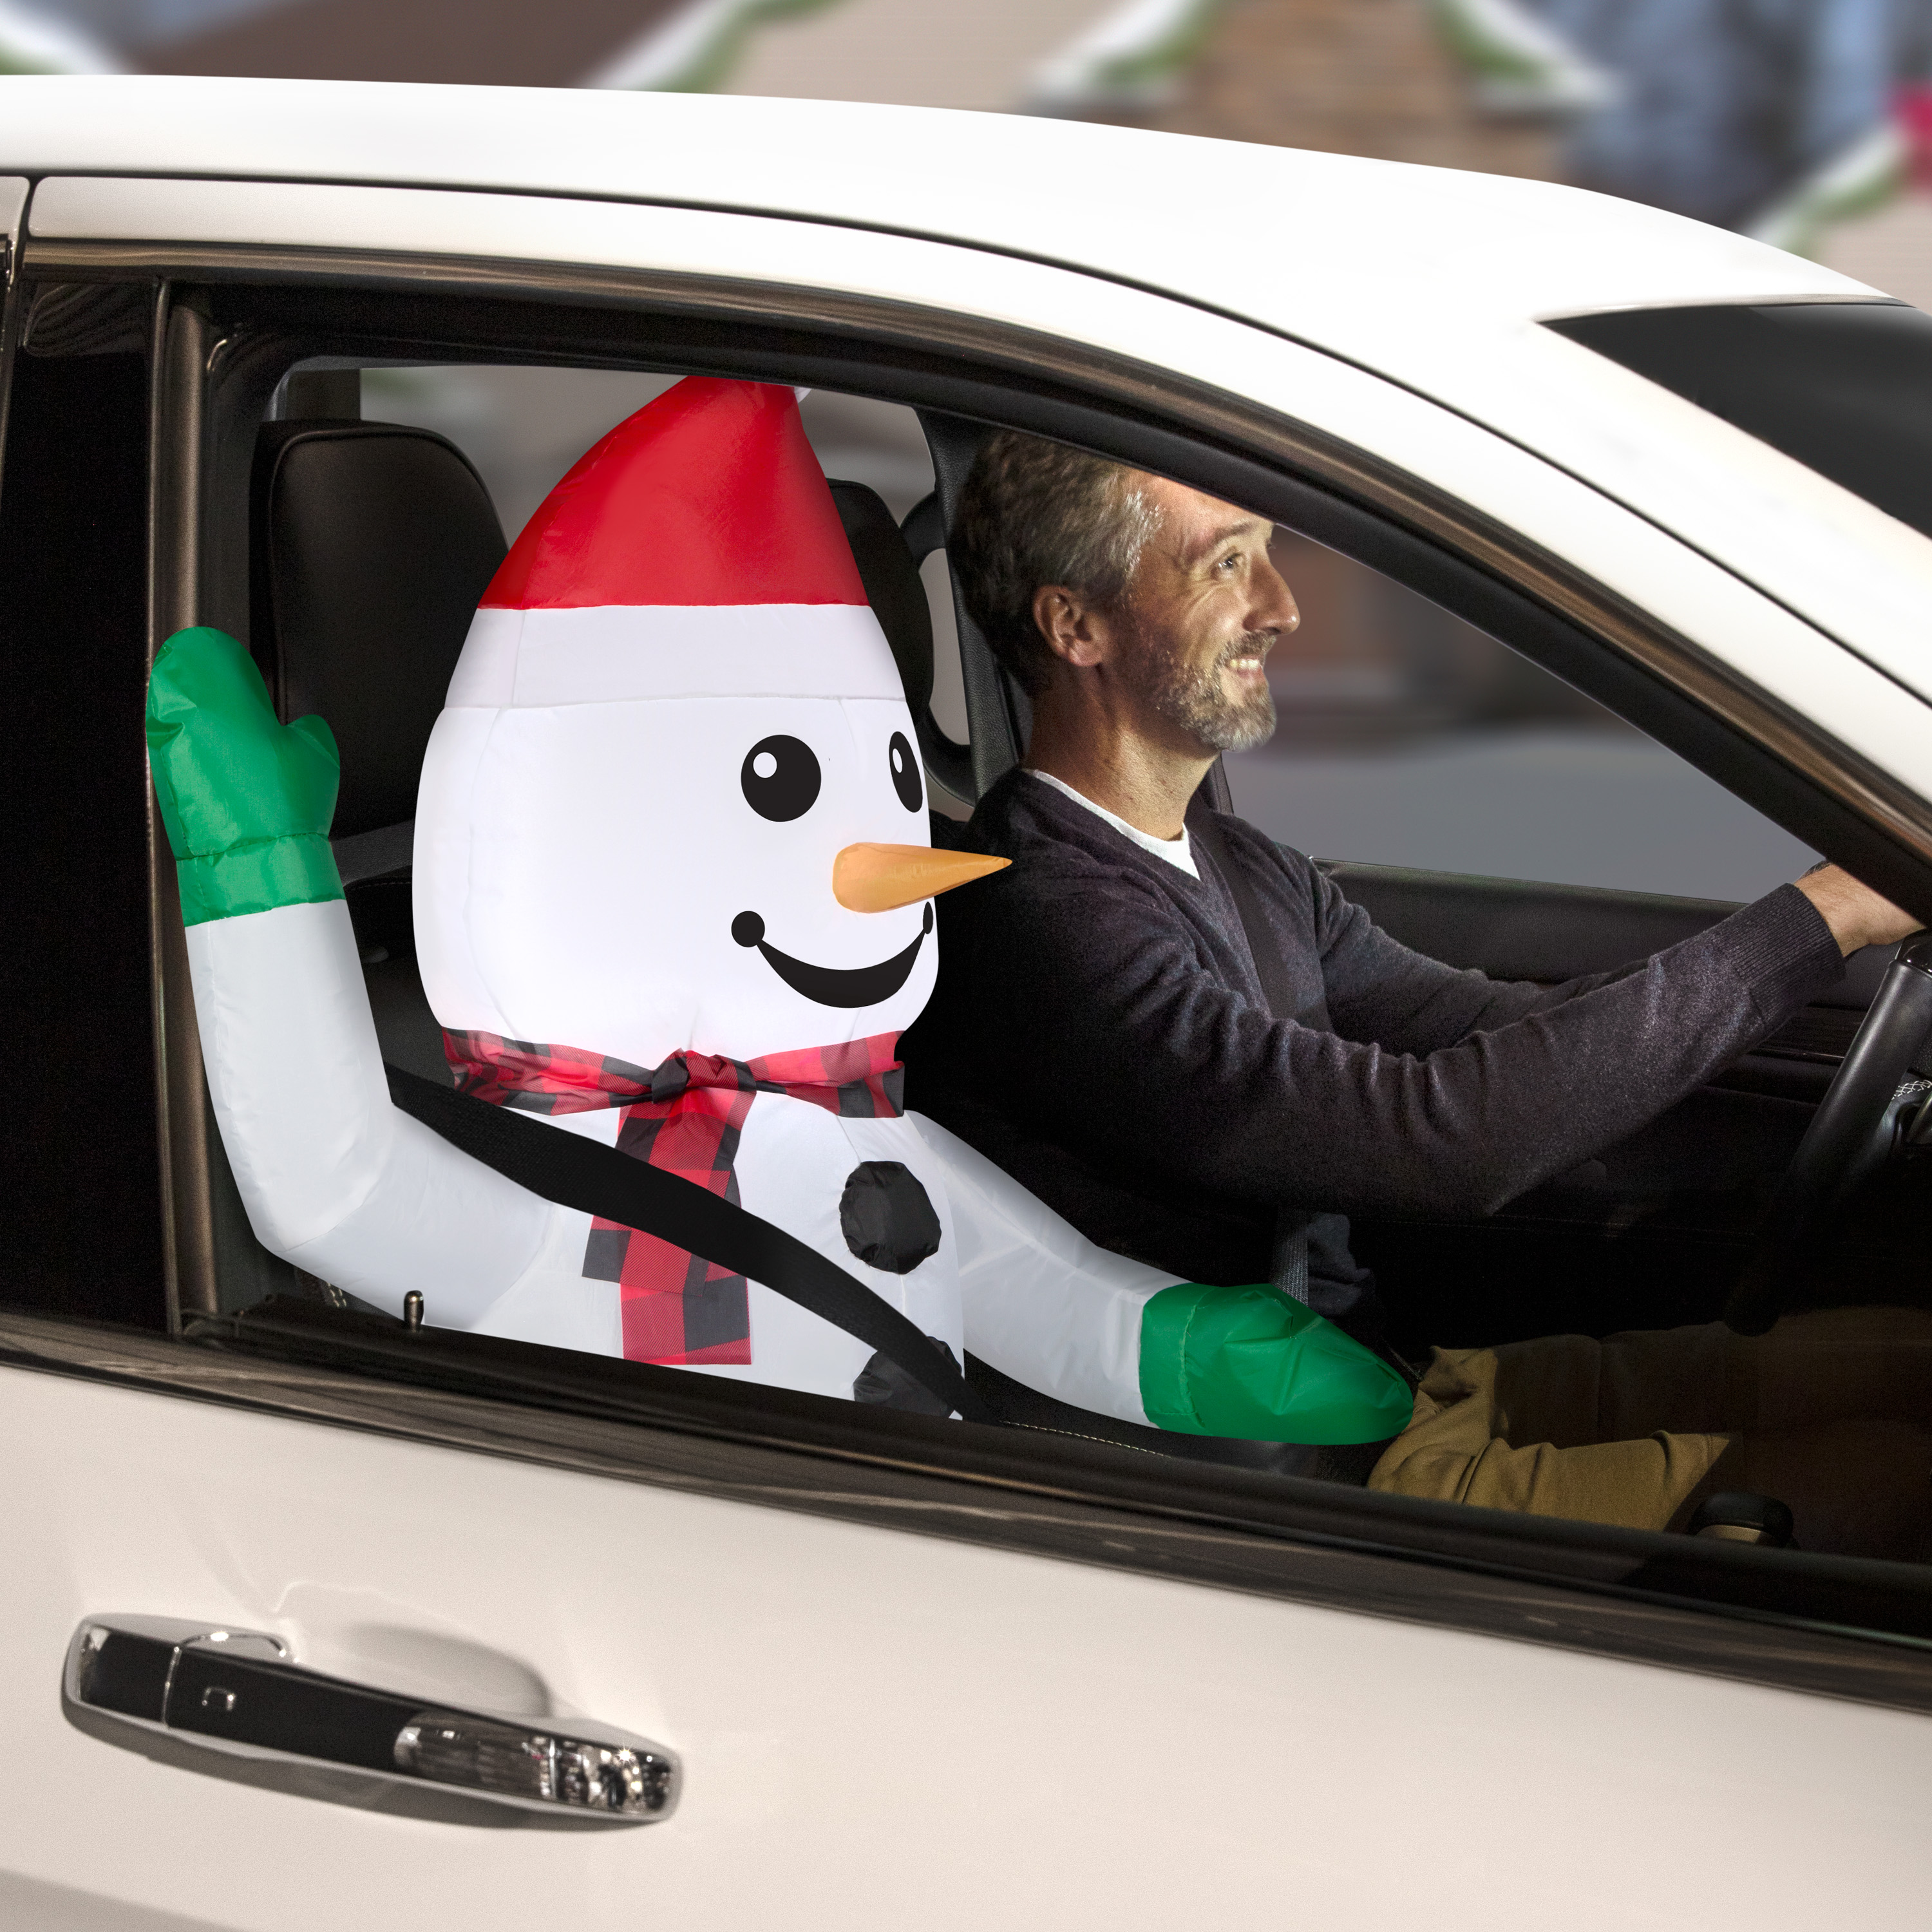 Airblown Inflatables Snowman Car Buddy - image 5 of 6